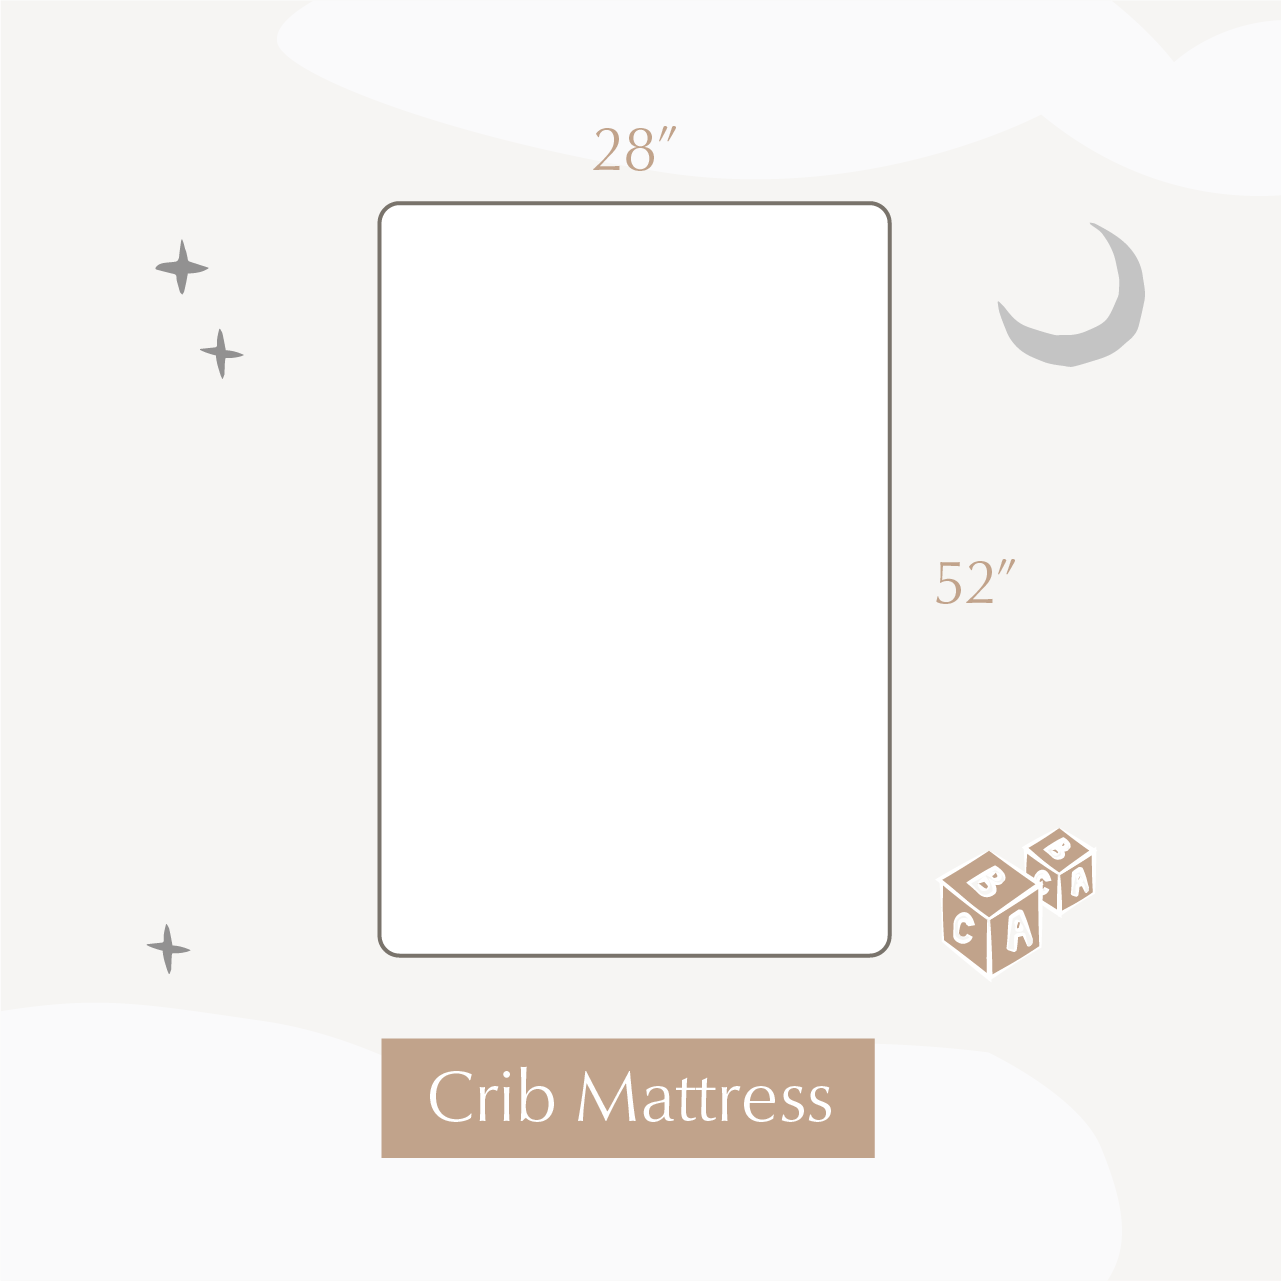 illustration of crib mattress showing the dimensions